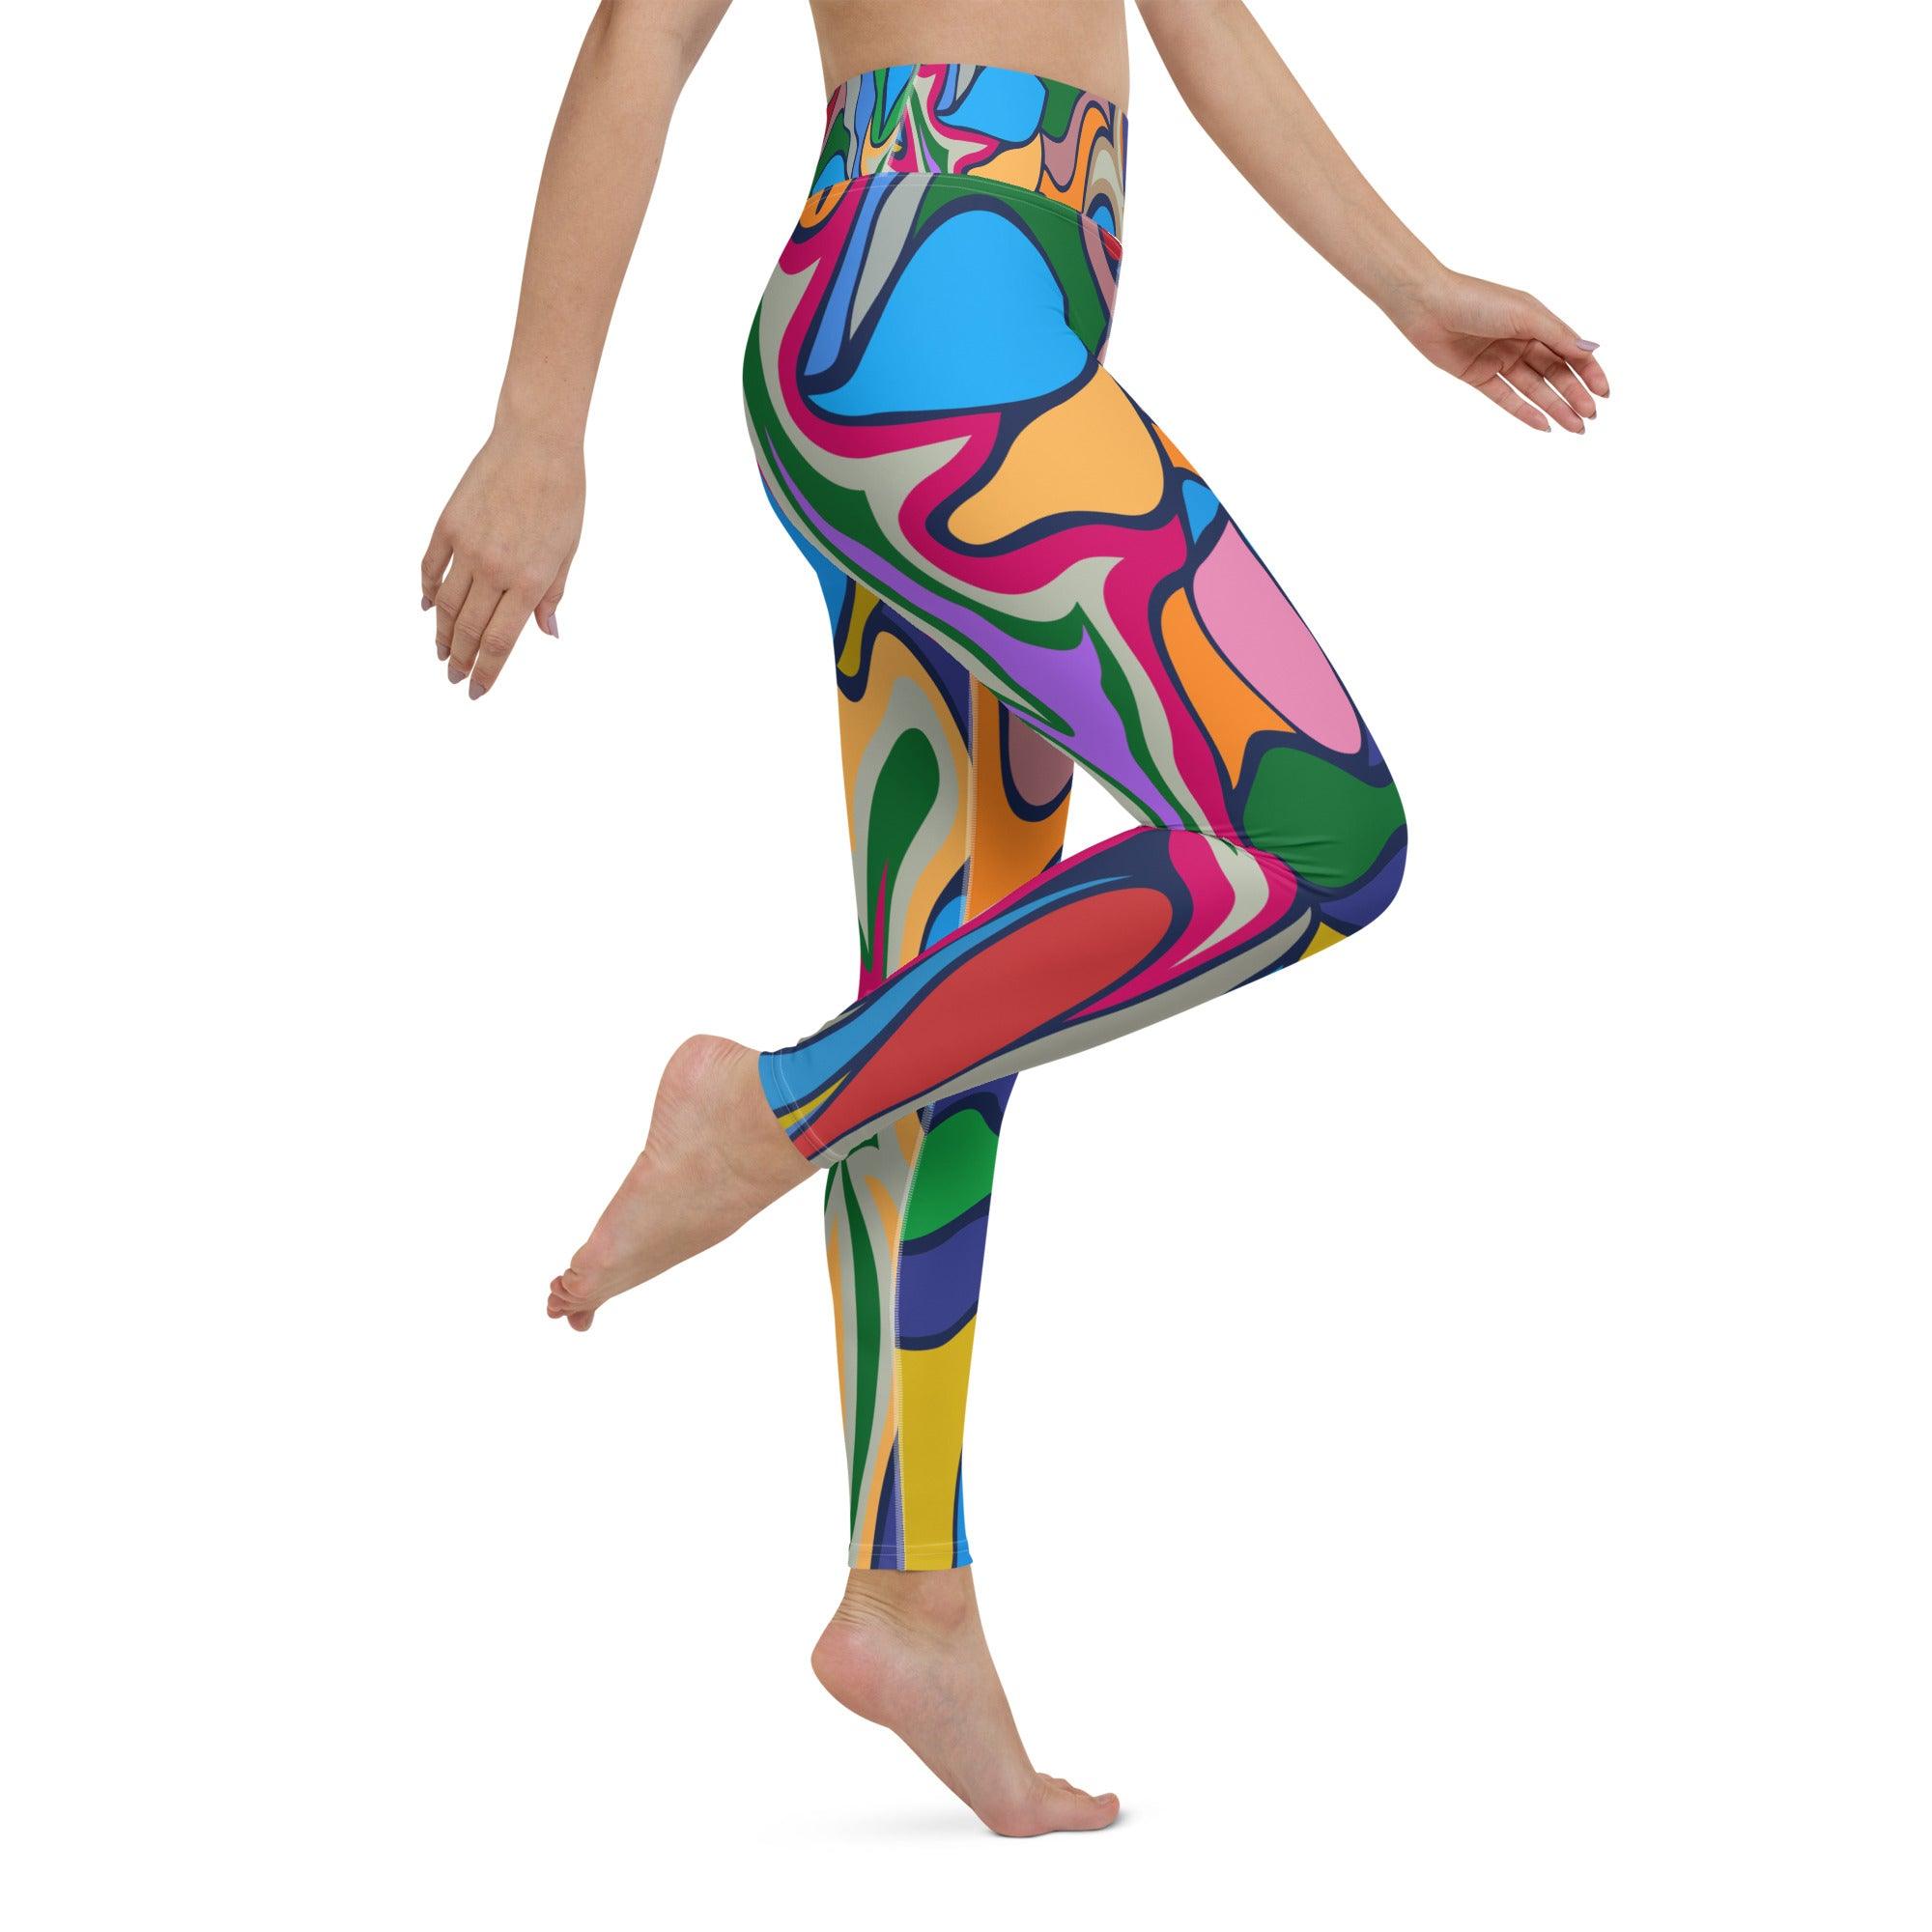 Stretchable Colorful Desire leggings perfect for yoga poses.